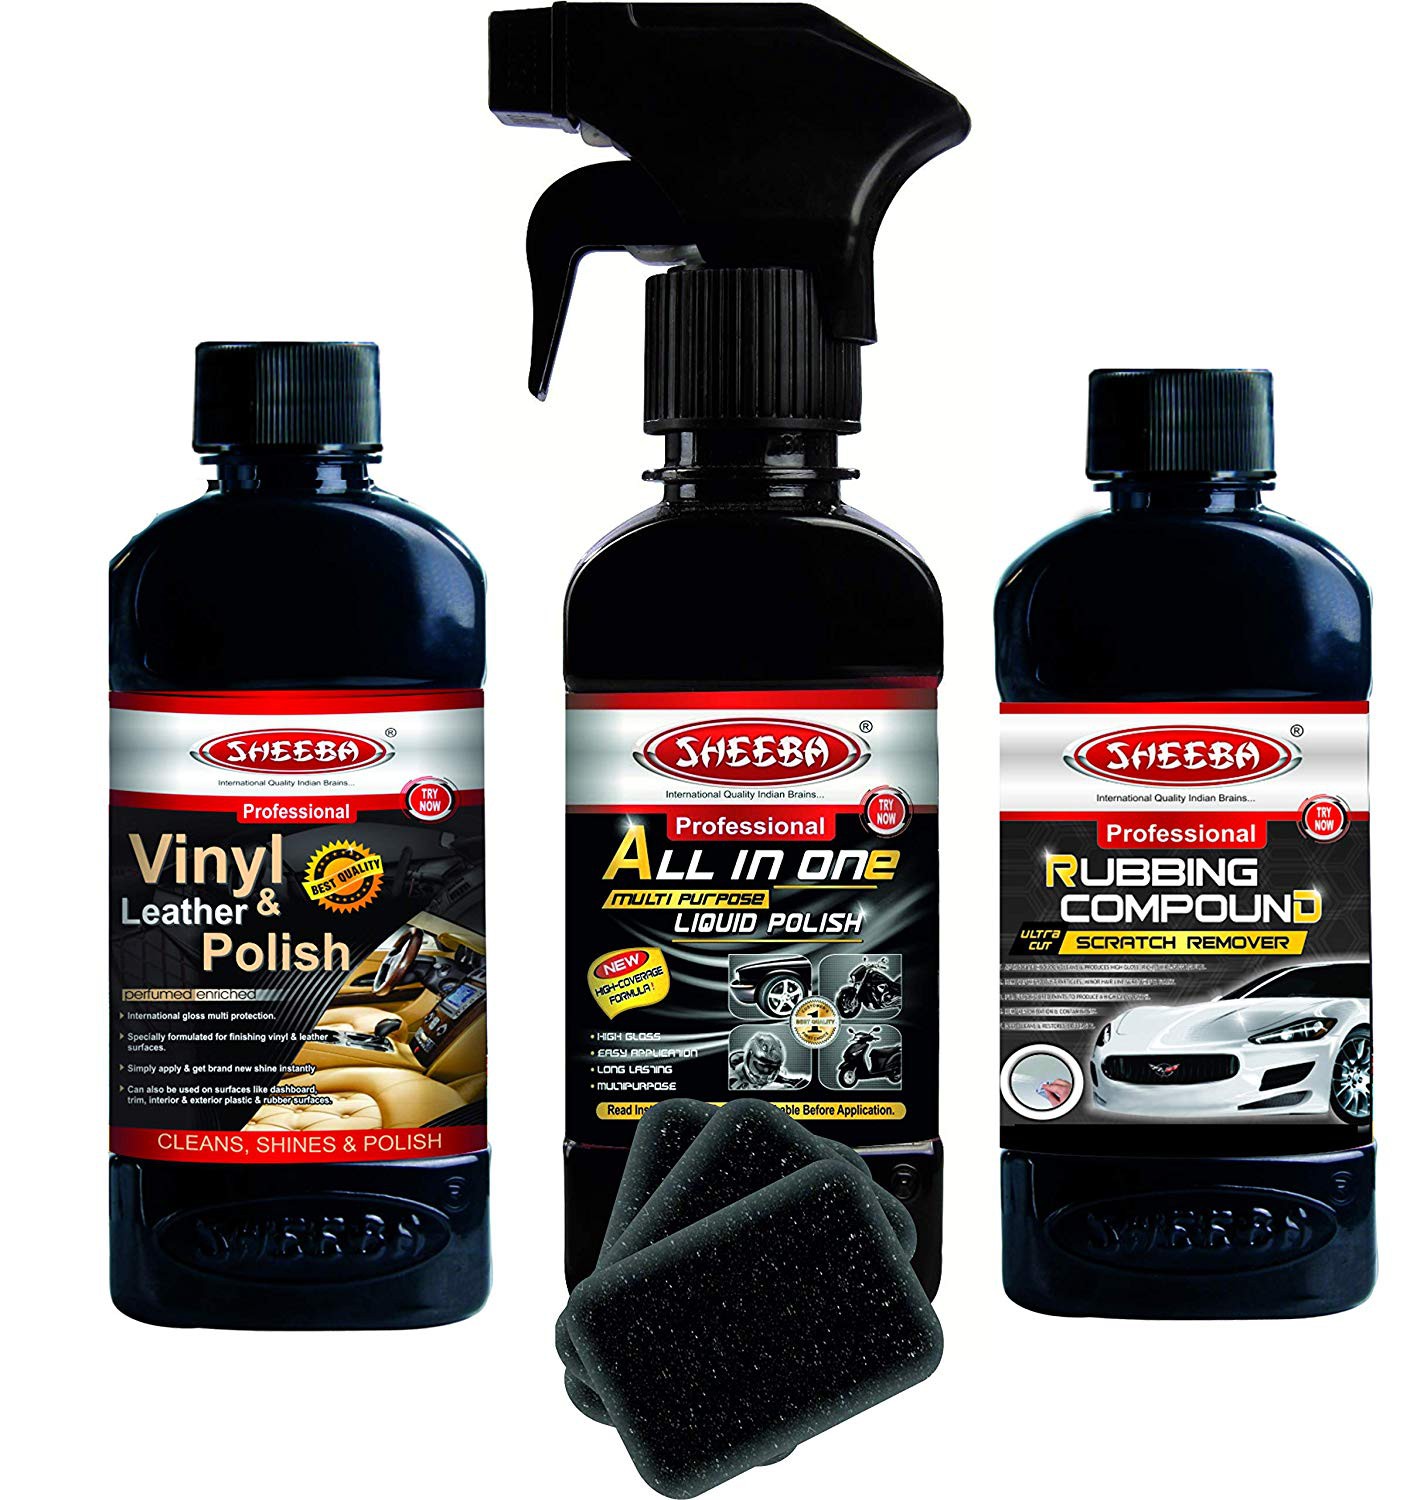 sheeba-multi-surface-car-polish-and-scratch-remover-kit-pack-of-3